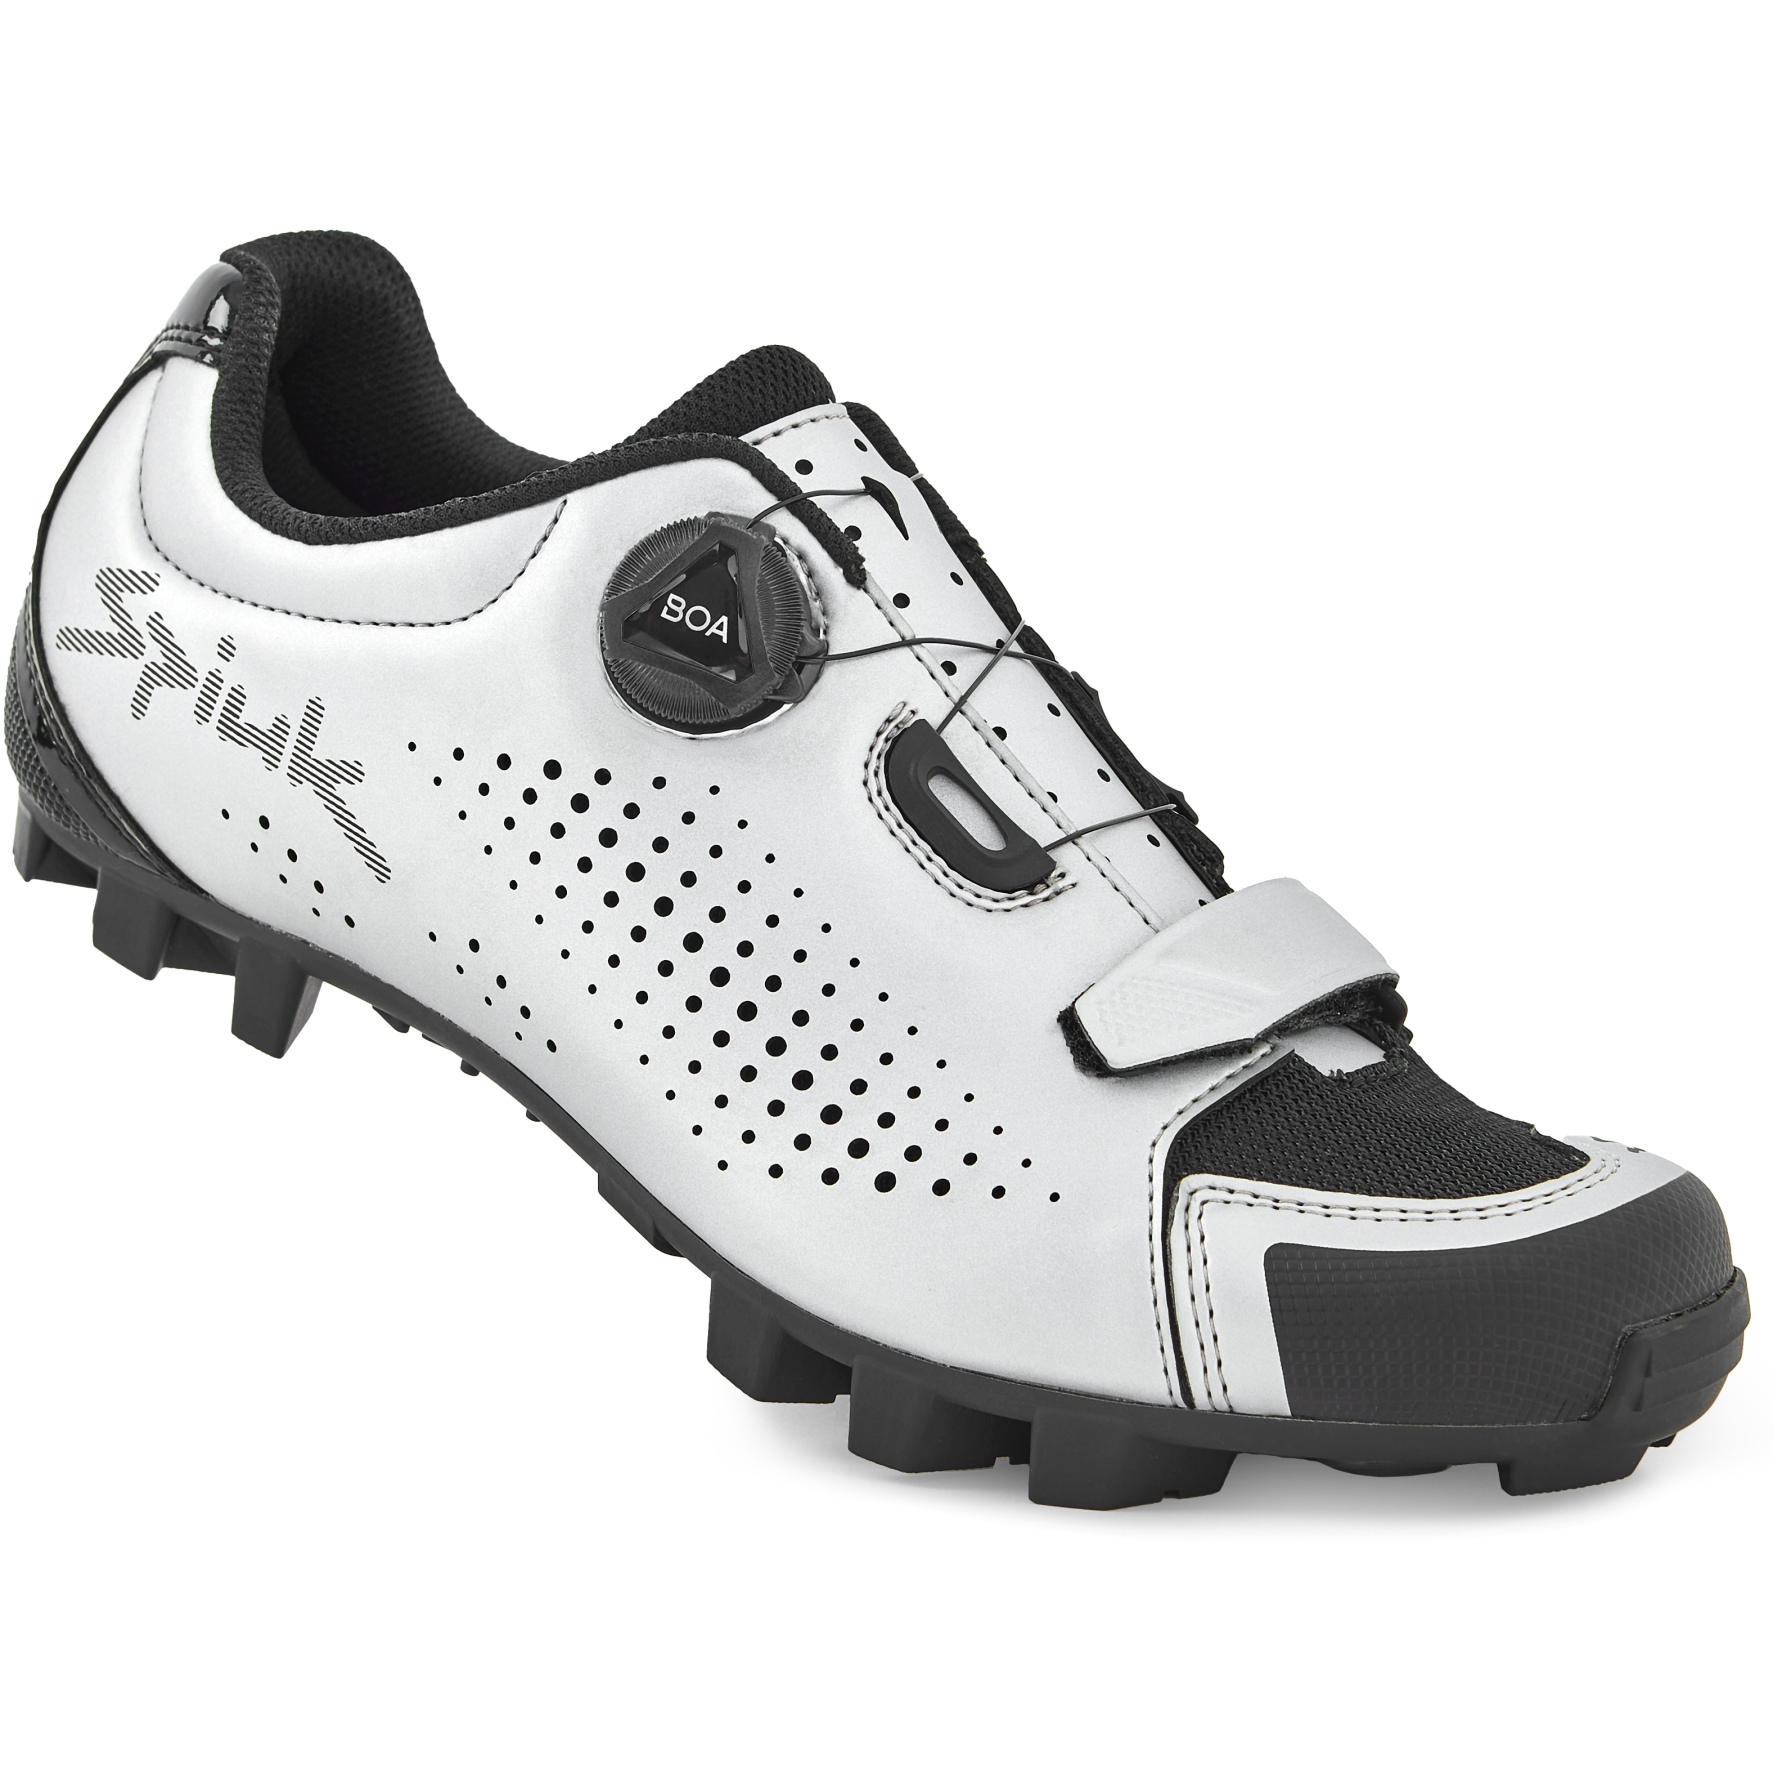 Image of Spiuk Mondie MTB Shoe - silver